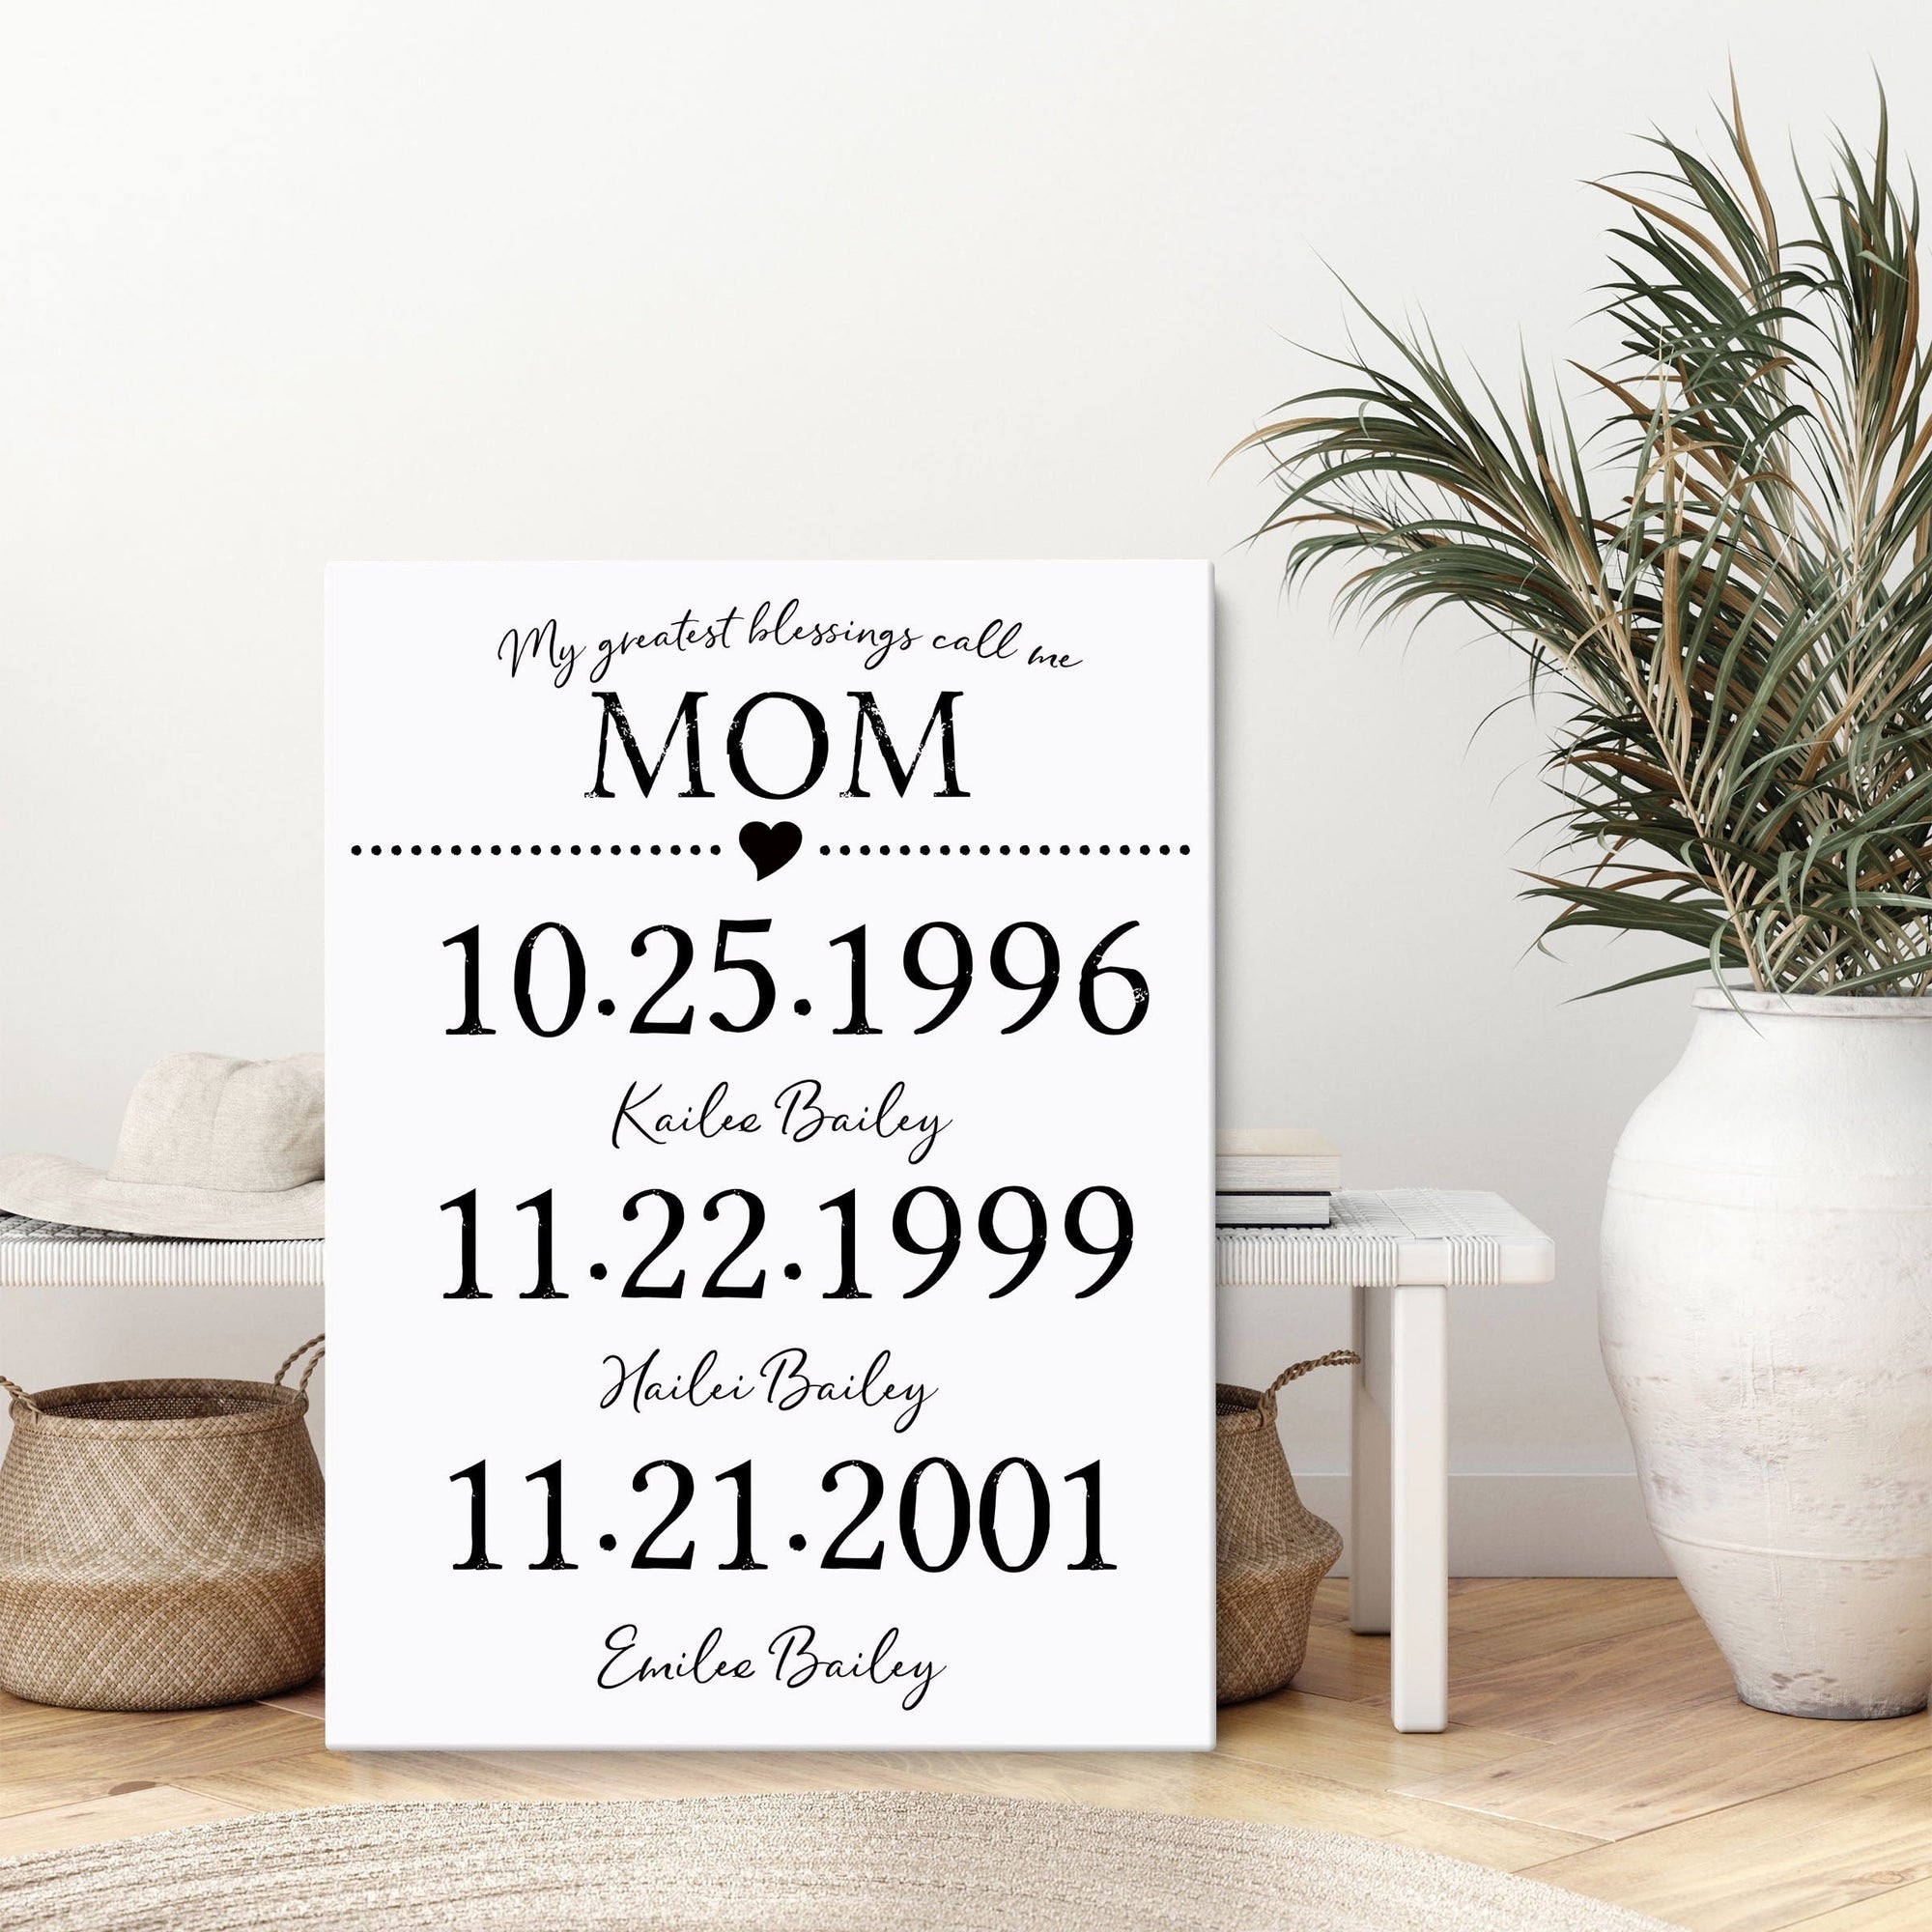 Gifts for Mother | Order Best Gift for MOM | Best Gifts Ideas For Mom - IGP